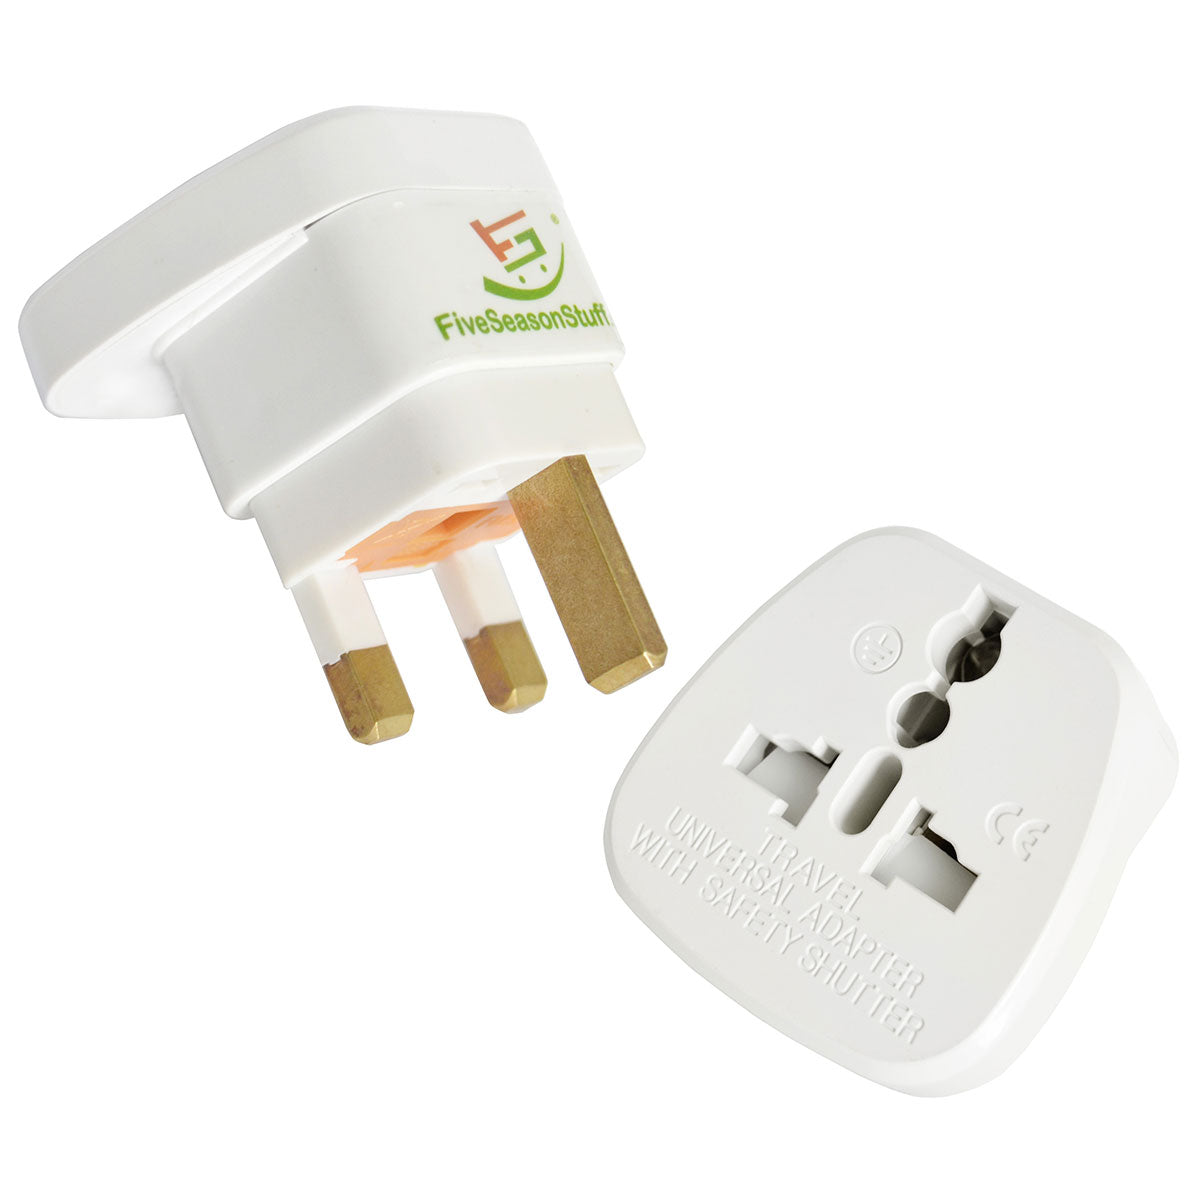 1 Travel Adapter for Traveling to United Kingdom (White) Type G